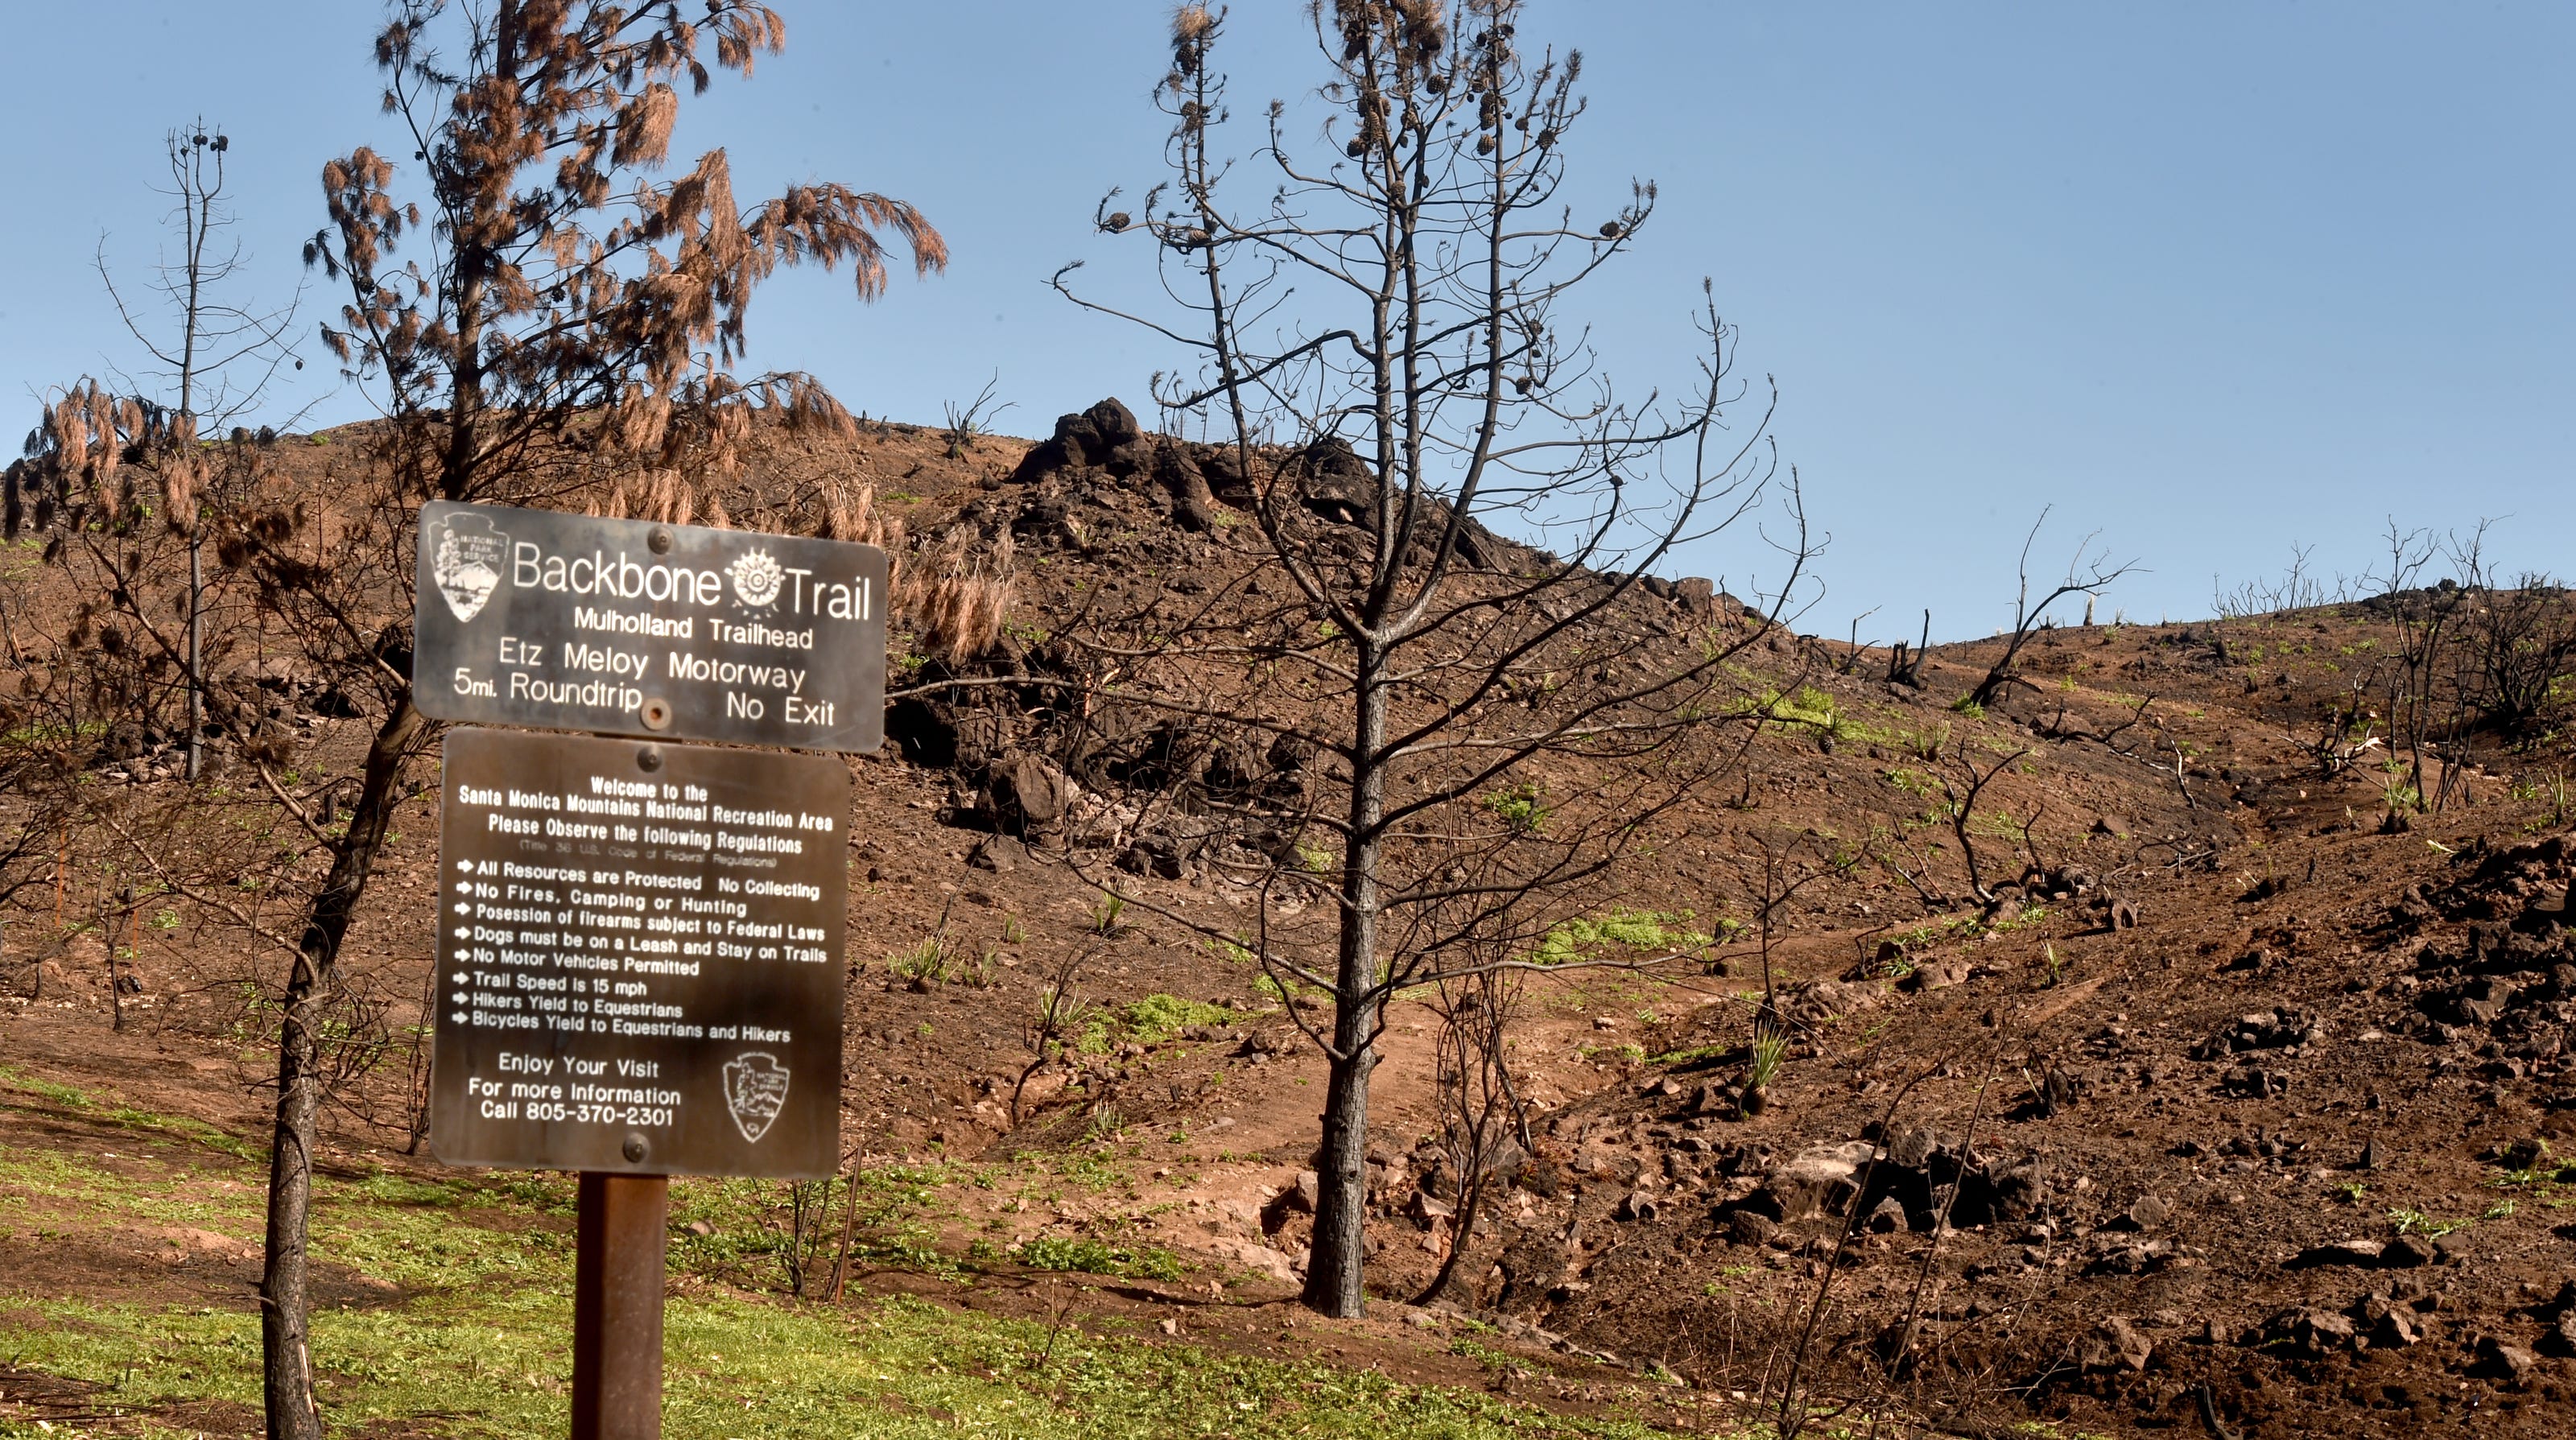 Edison to pay $20 million for damage suffered by local parks during Woolsey Fire